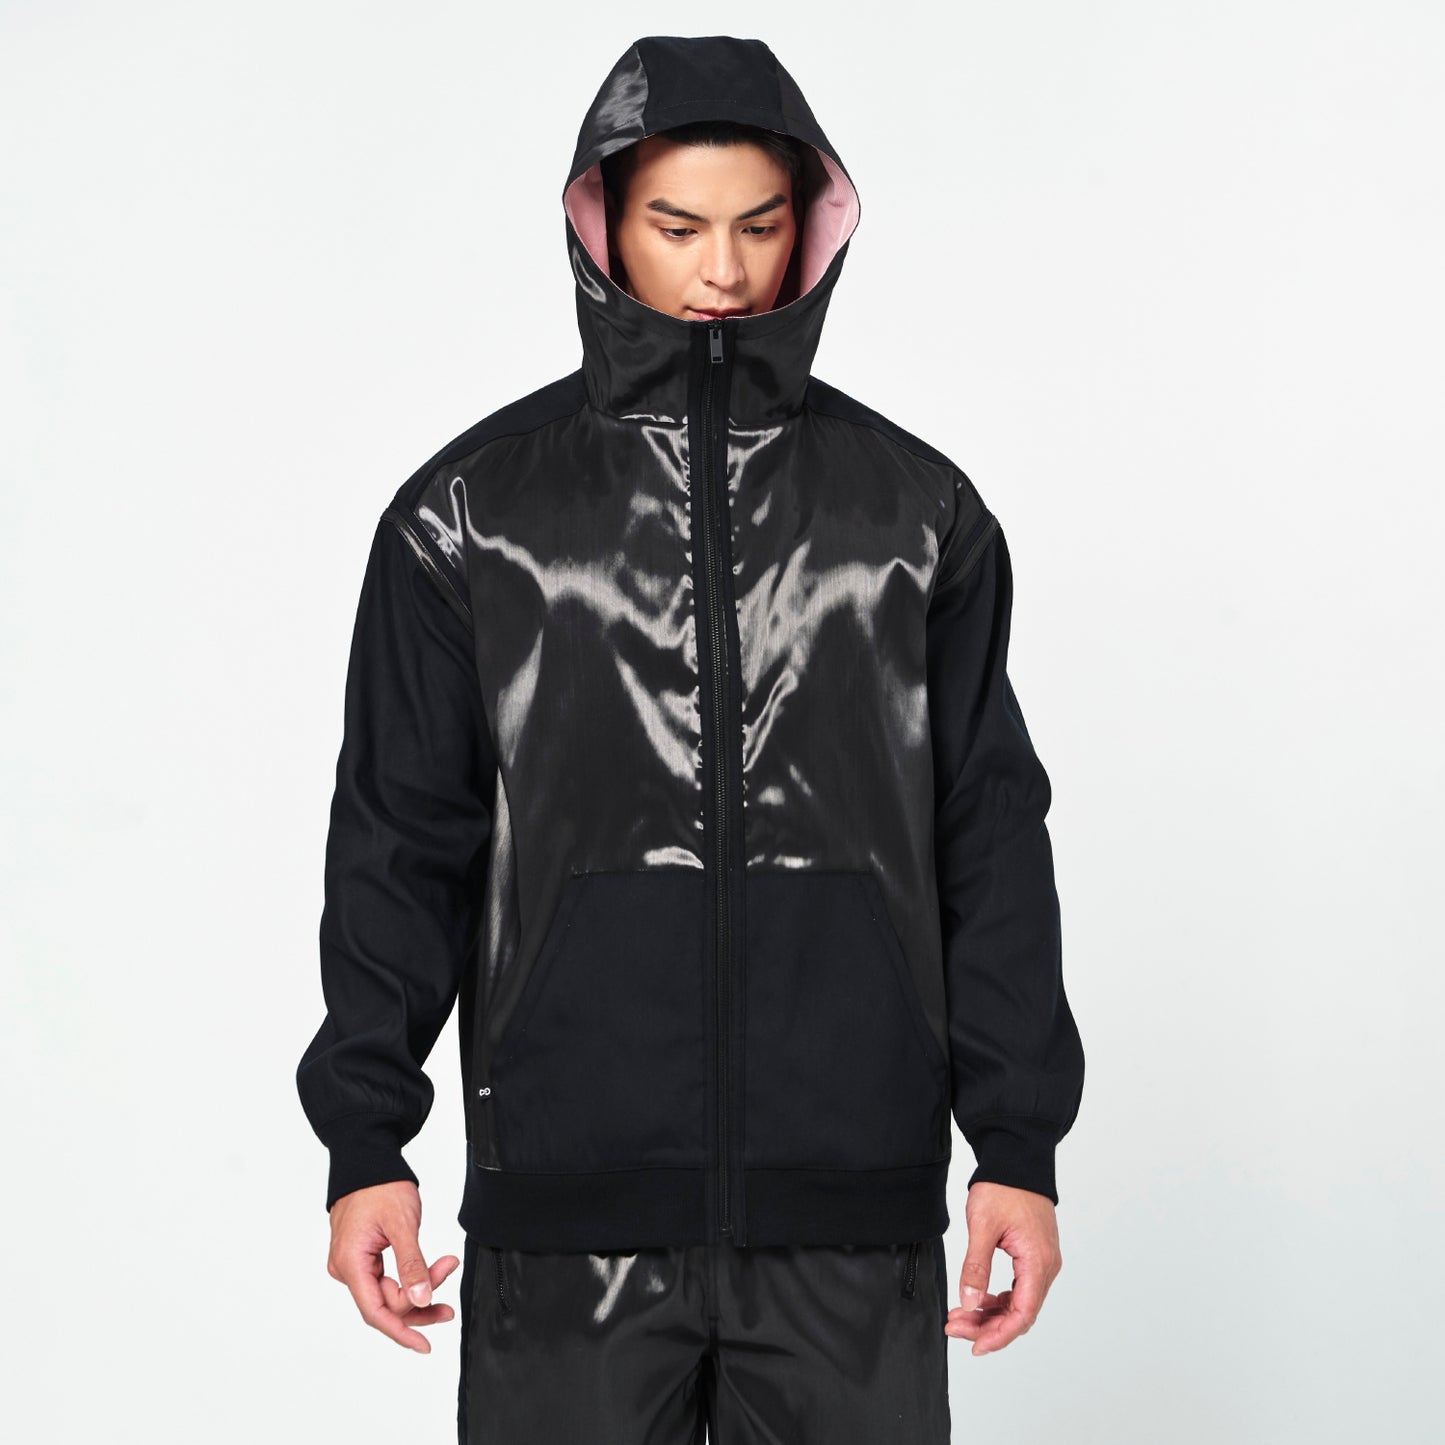 BeWithYou- Bright Black Contrast Hooded Jacket